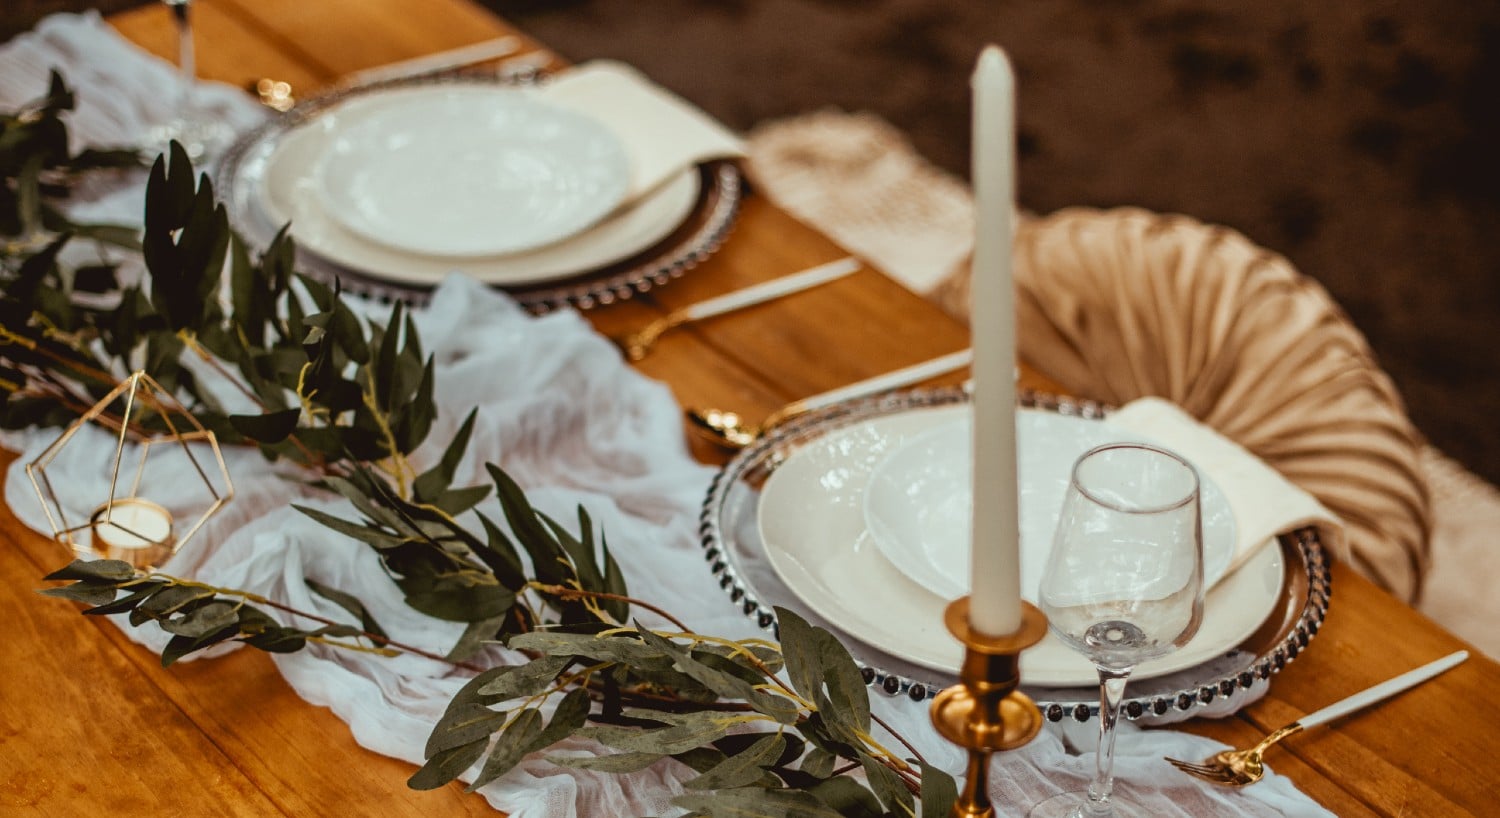 Wedding table set for two with a tall candle and greenery